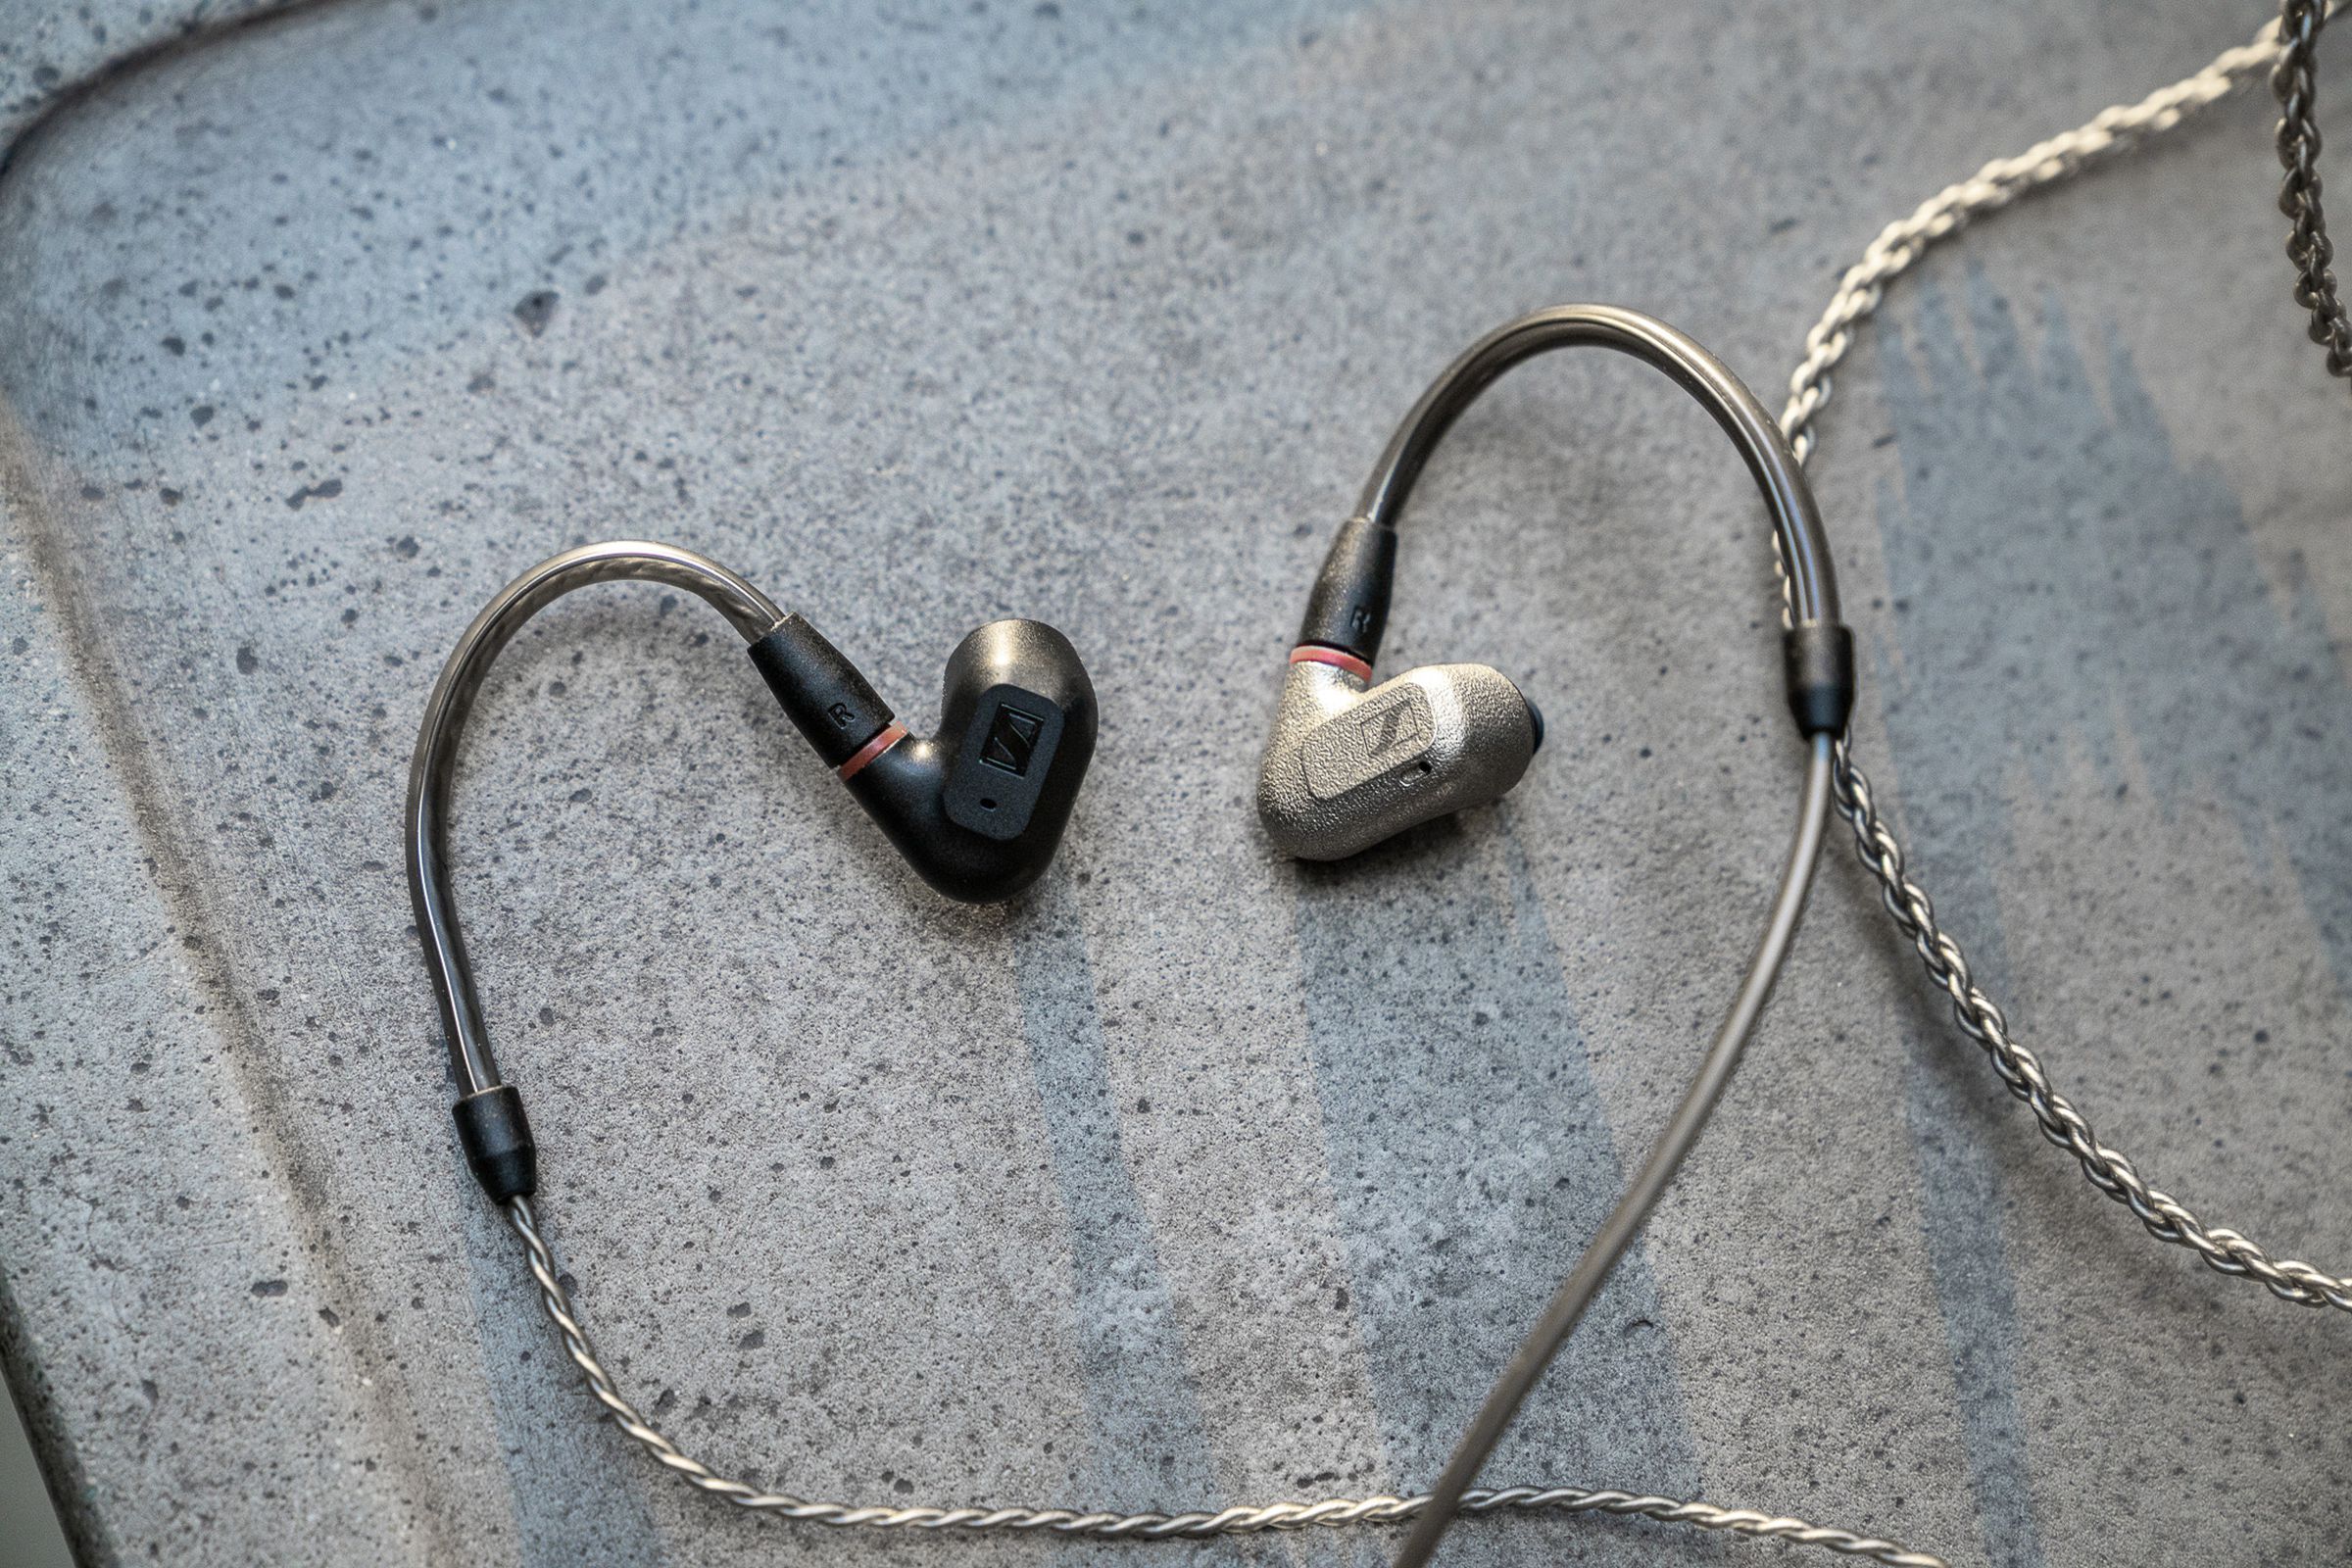 A photo of Sennheiser’s IE 200 earbuds next to the company’s IE 600 eabuds.